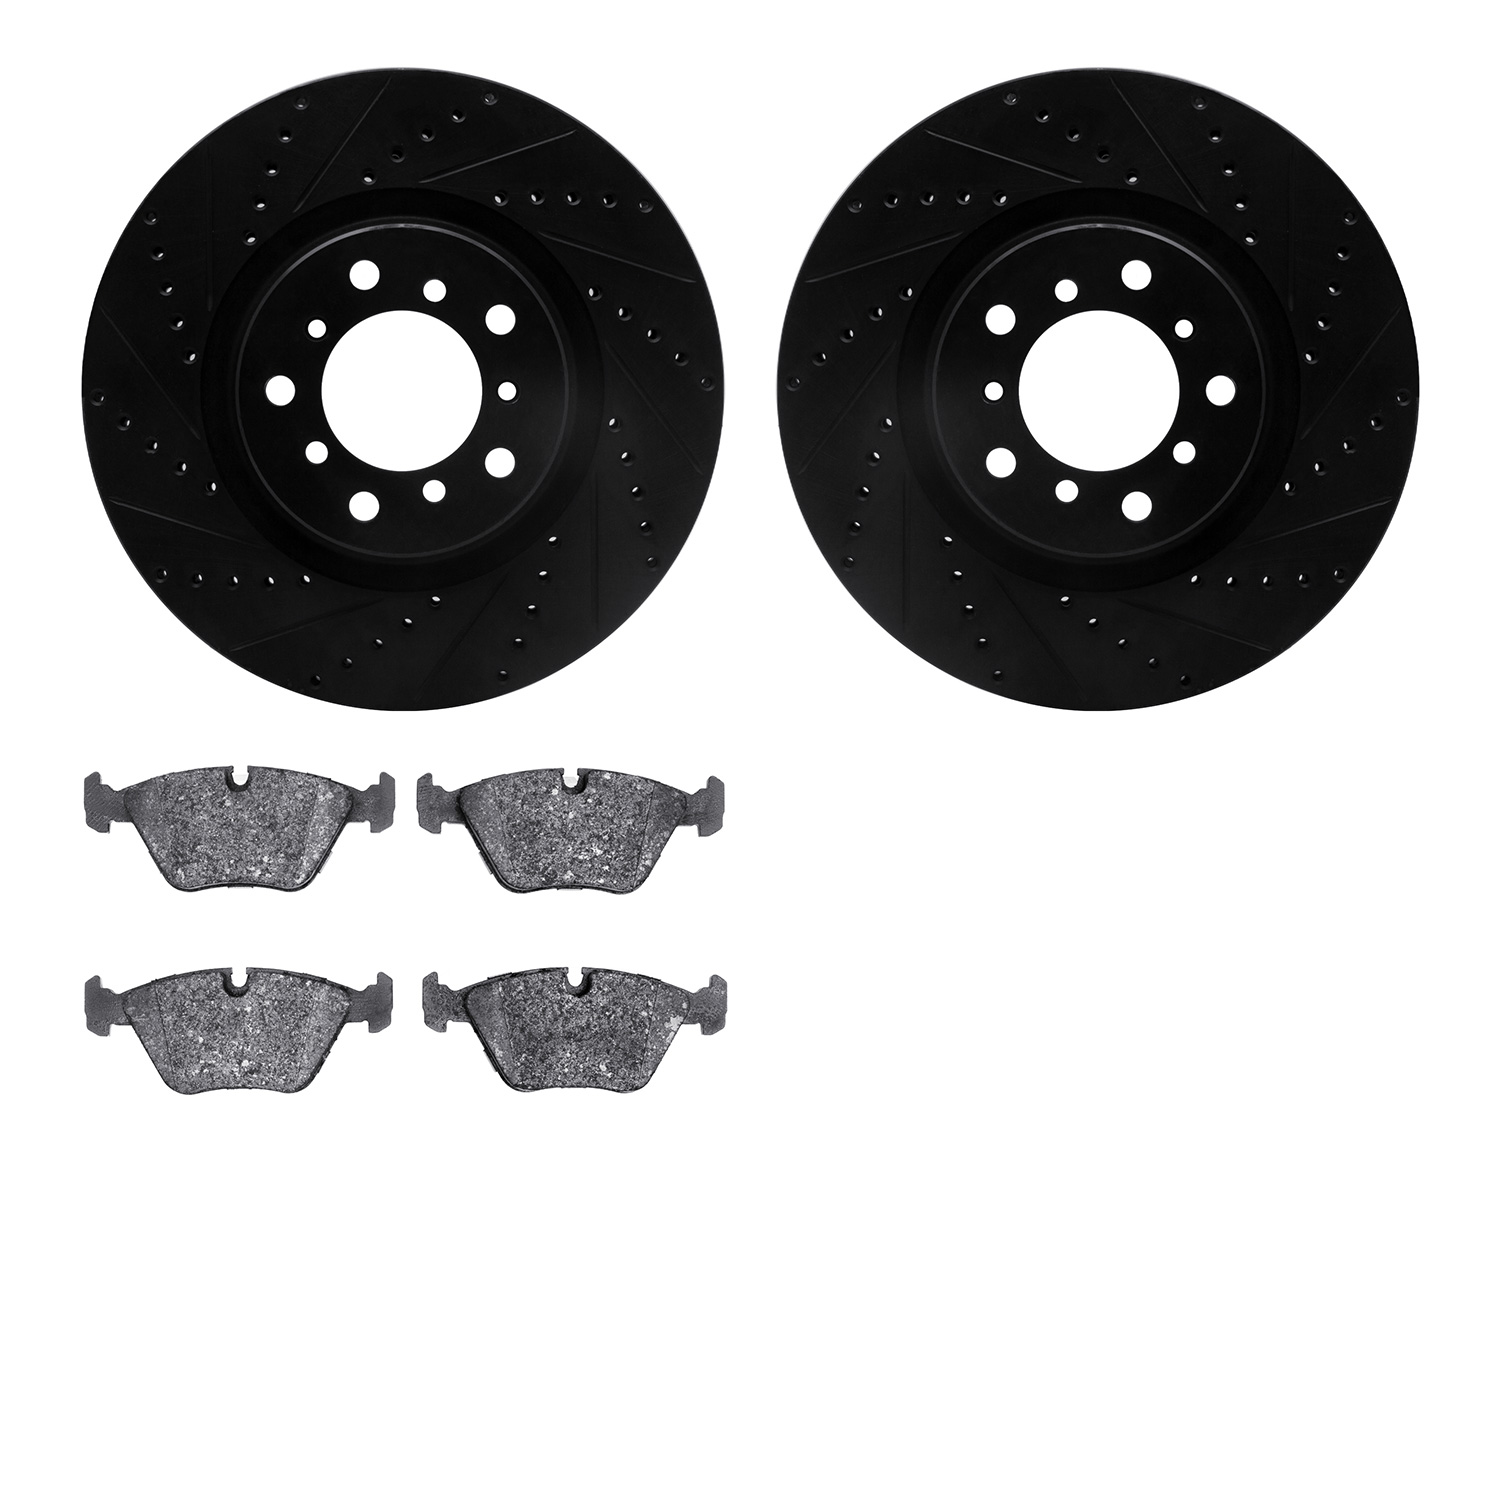 8302-31024 Drilled/Slotted Brake Rotors with 3000-Series Ceramic Brake Pads Kit [Black], 2001-2005 BMW, Position: Front